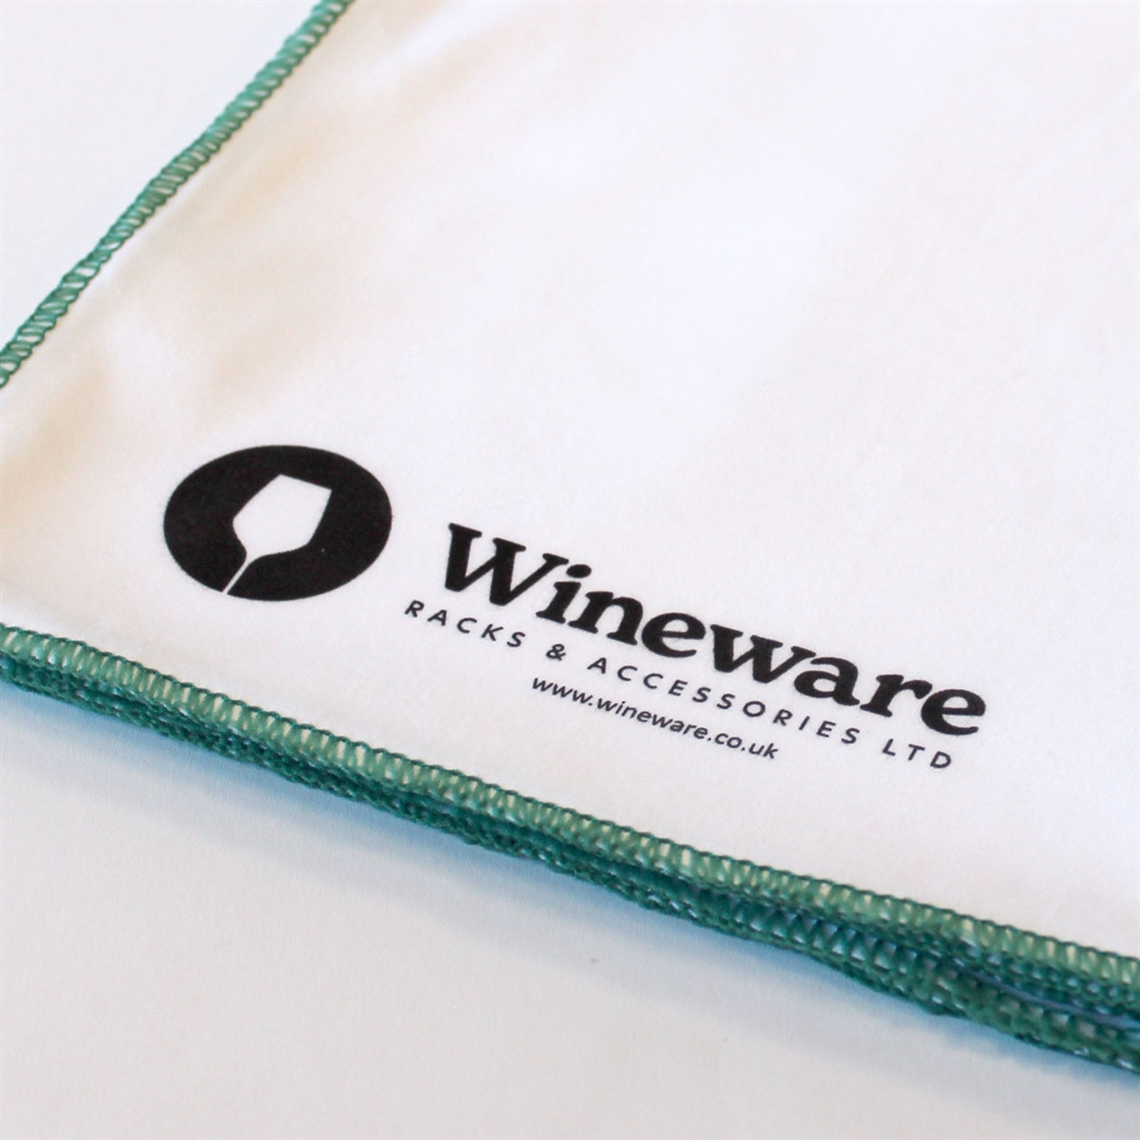 View more perfect drinking temperature for wine from our Wine Decanter Cleaning range